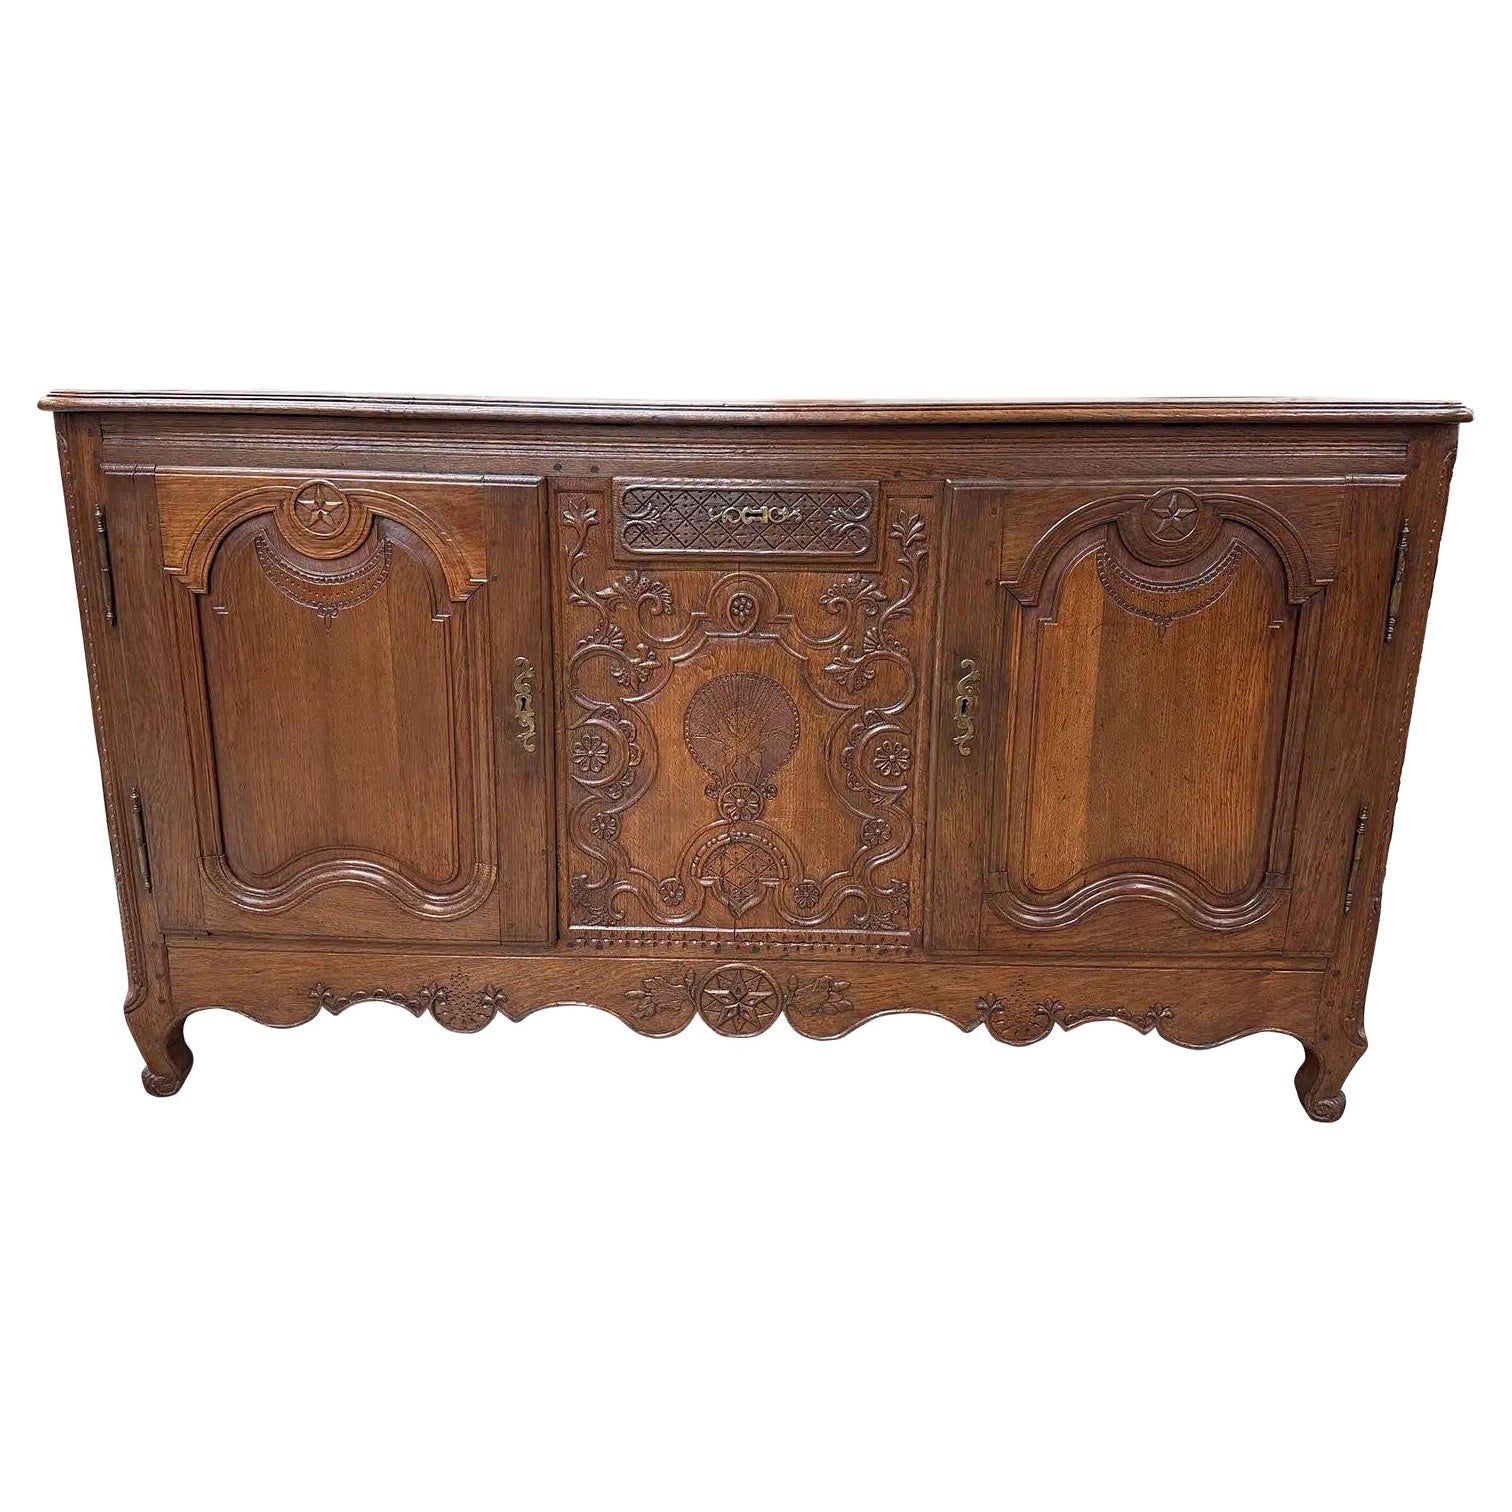 Early 18th Century French Enfilade For Sale